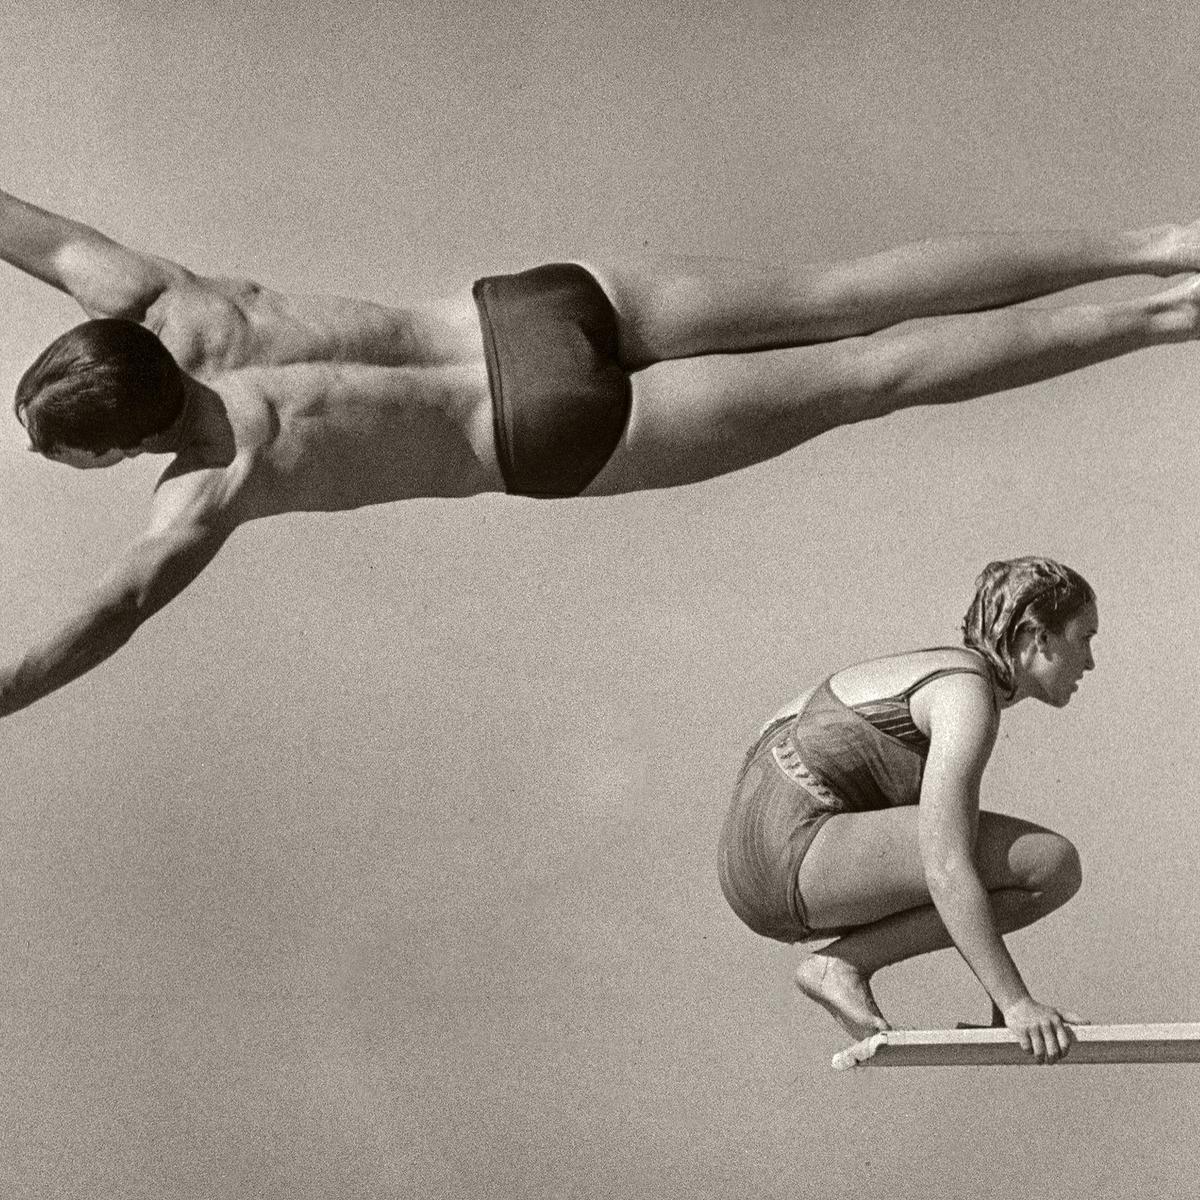 Swimmers diving off a diving board